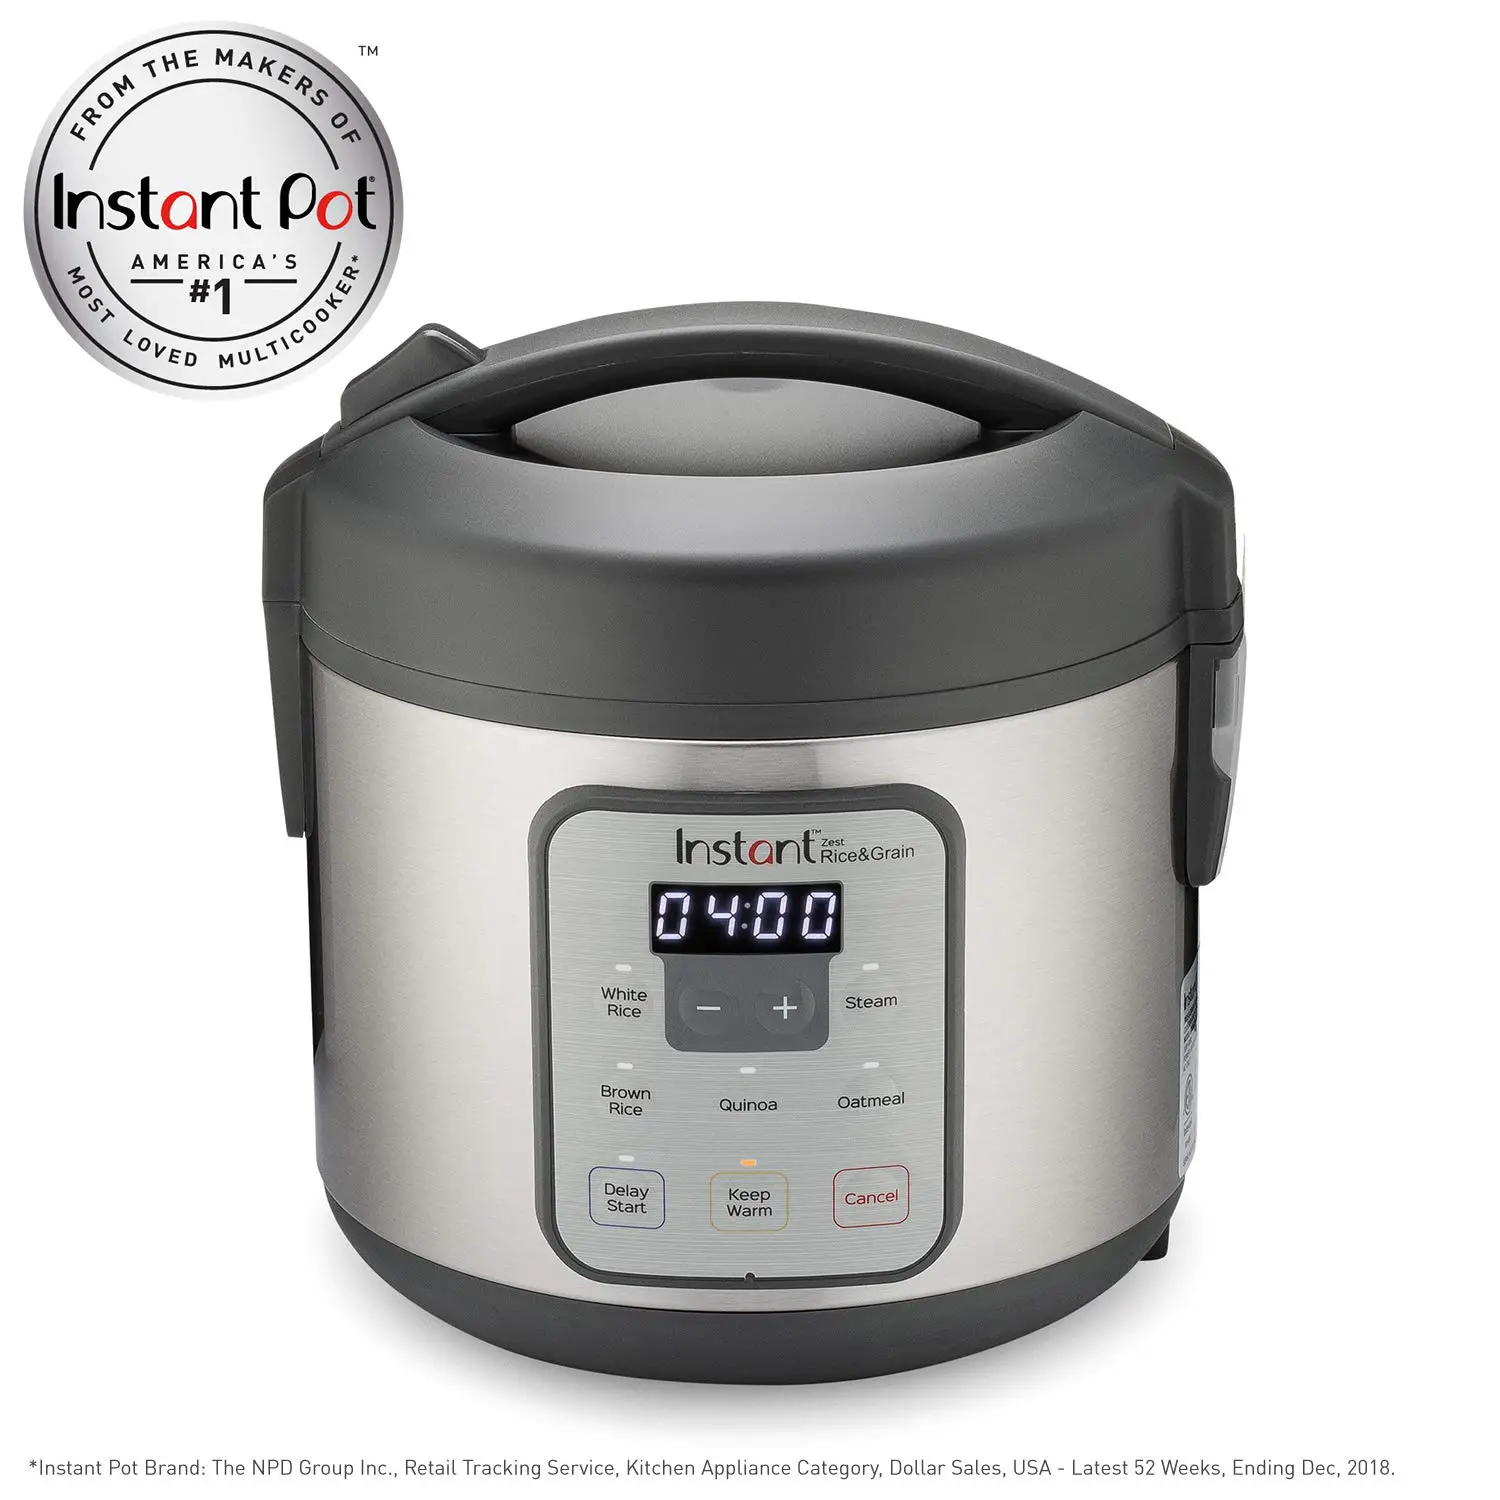 Best Stainless Steel Rice Cooker: Instant Pot 8